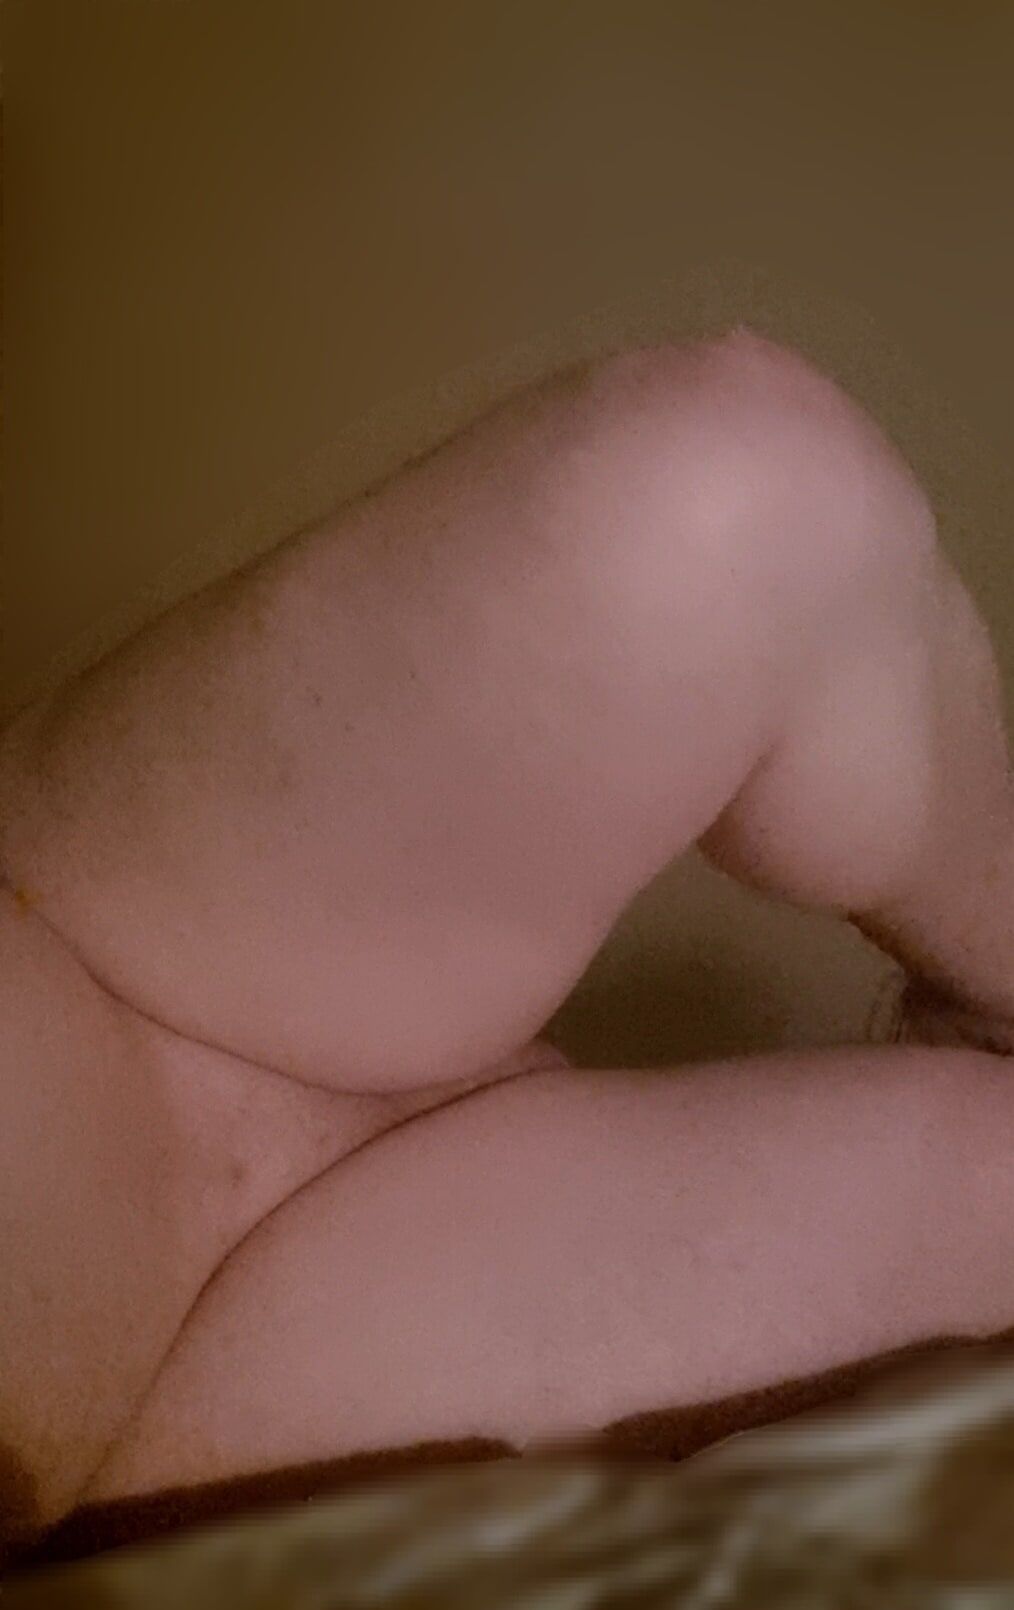 Me nude poses #11